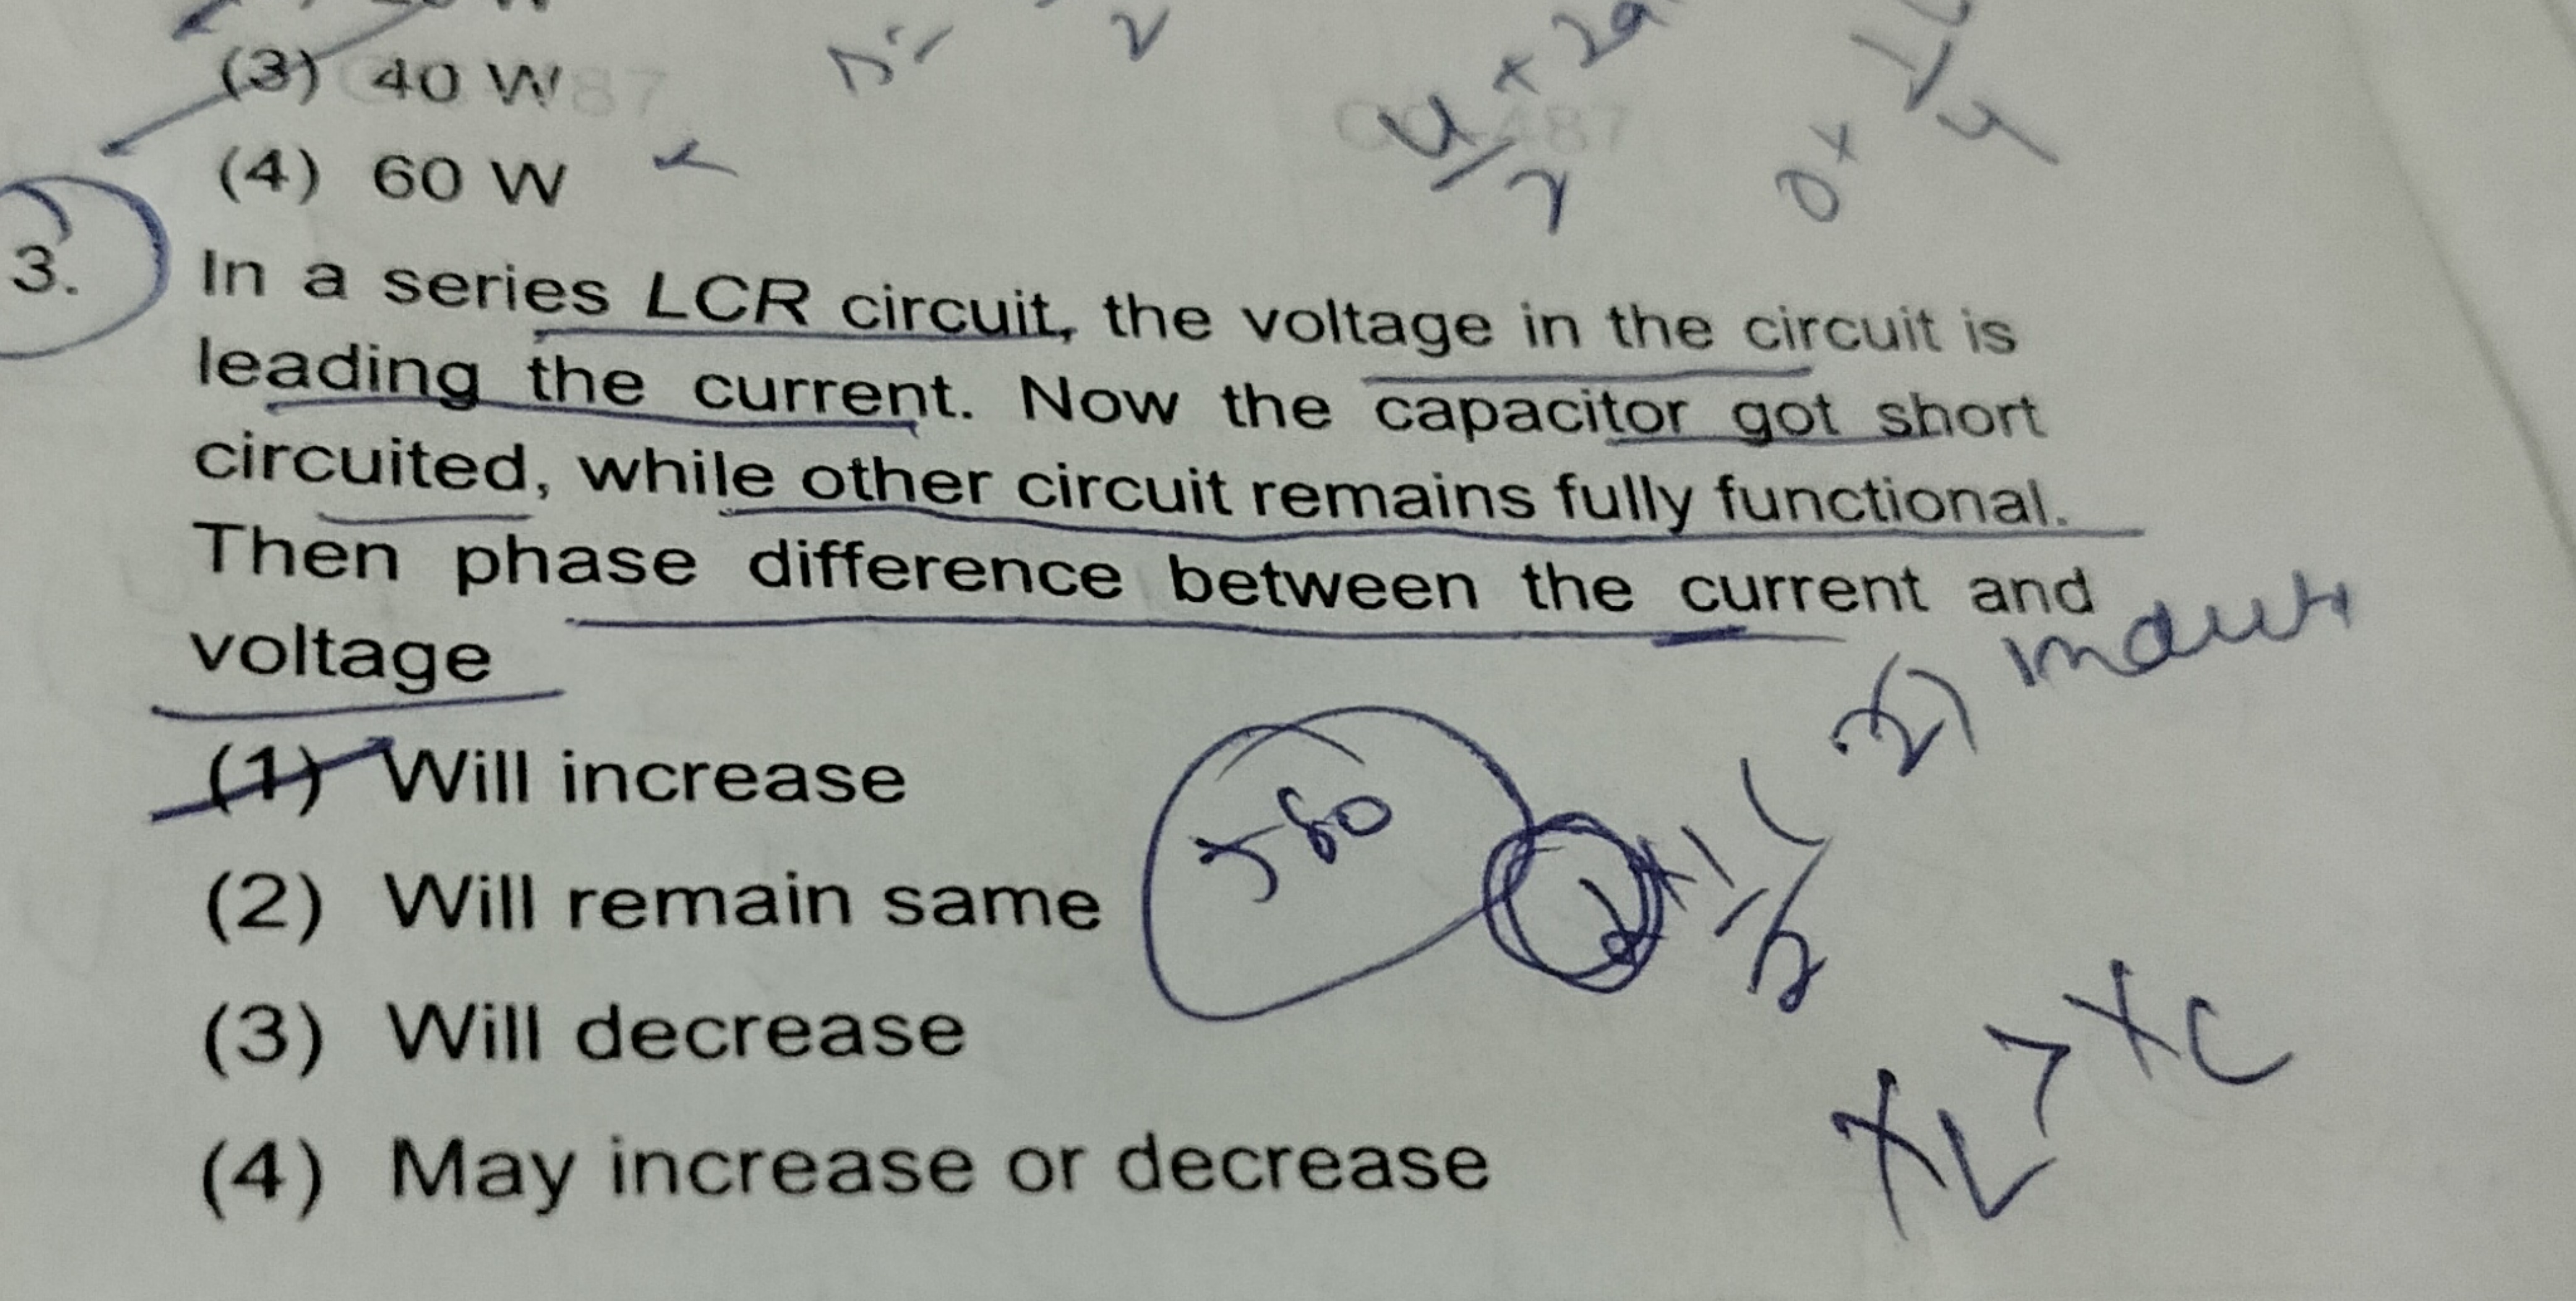 In a series LCR circuit, the voltage in the circuit is leading the cur